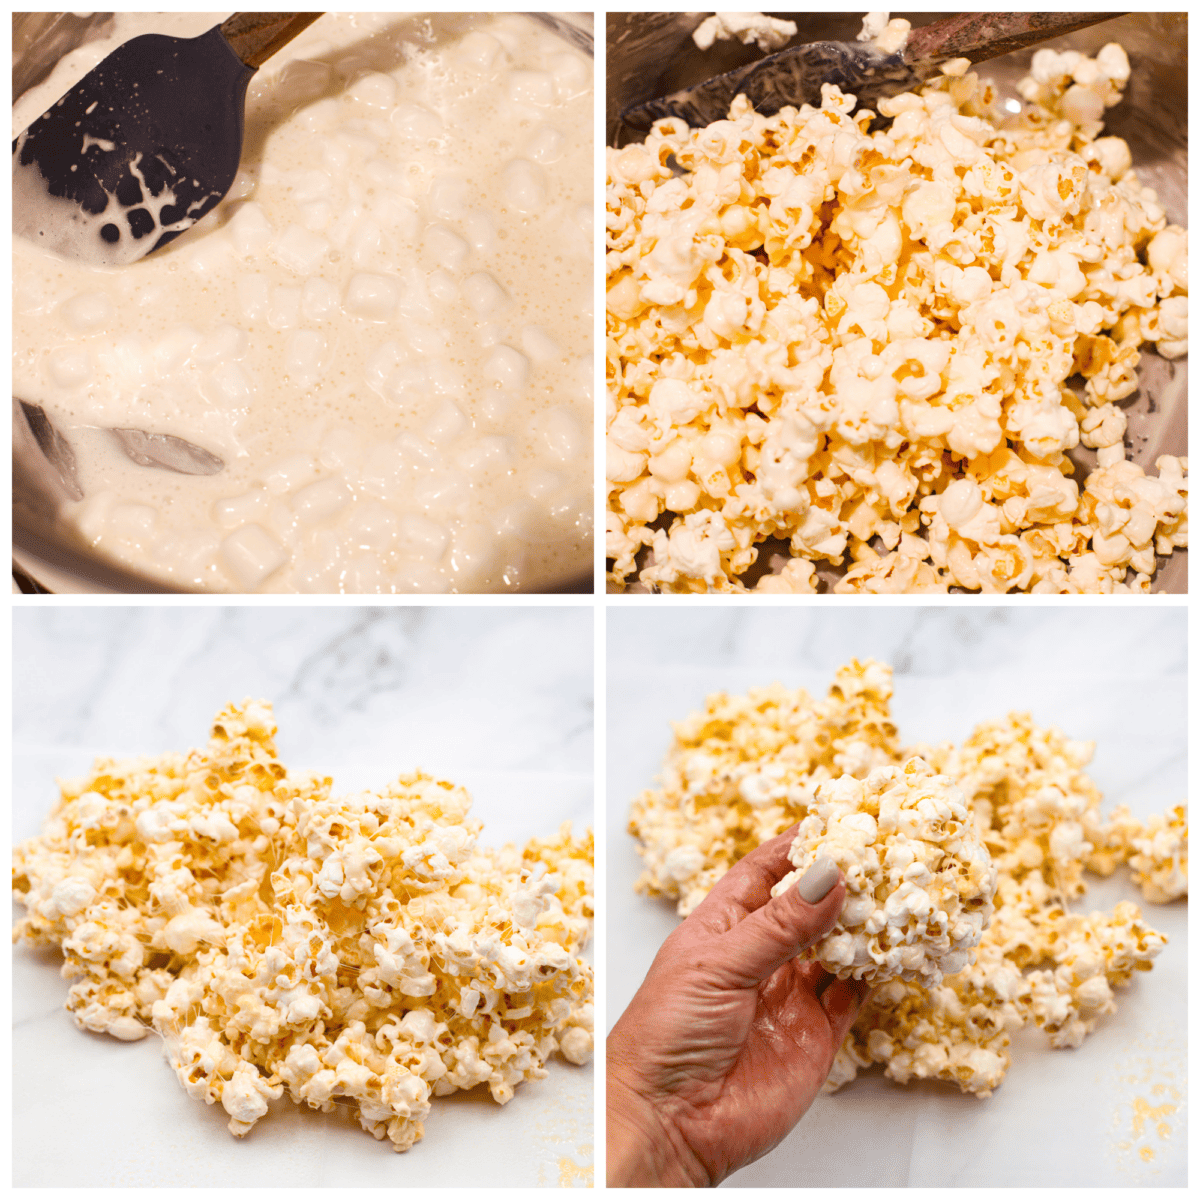 4-photo collage of the popcorn balls being formed.